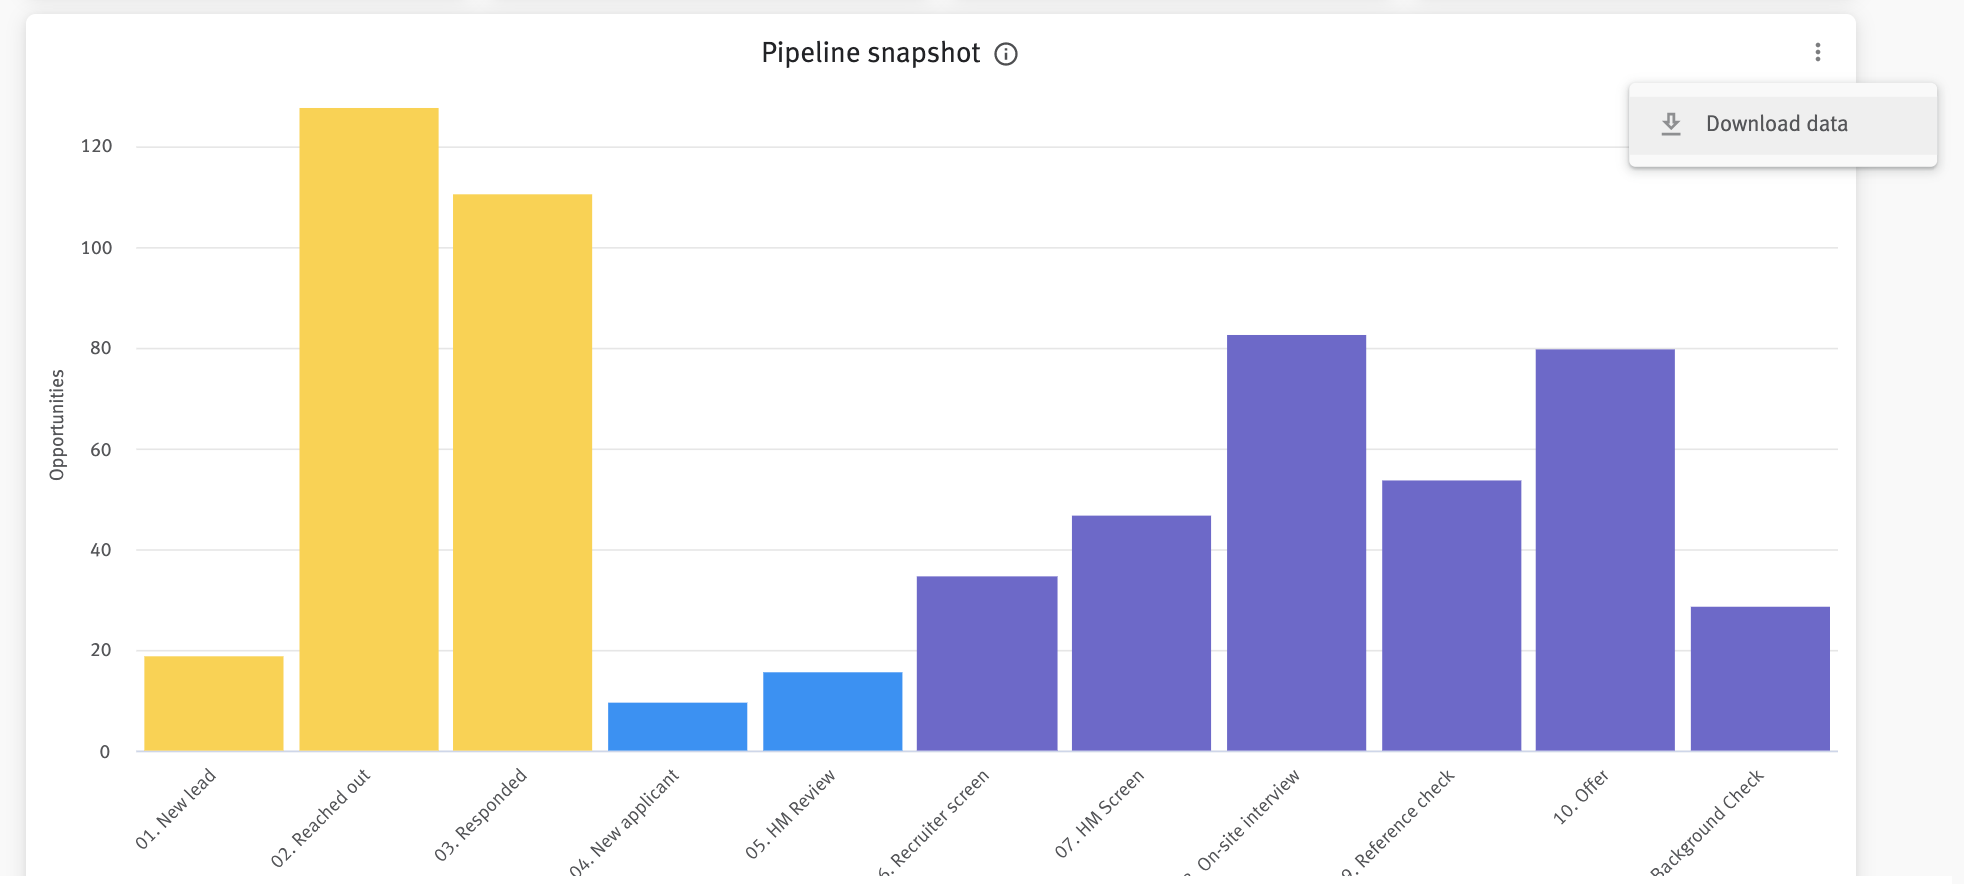 Pipeline snapshot chart with Download data button extended from upper right corner.